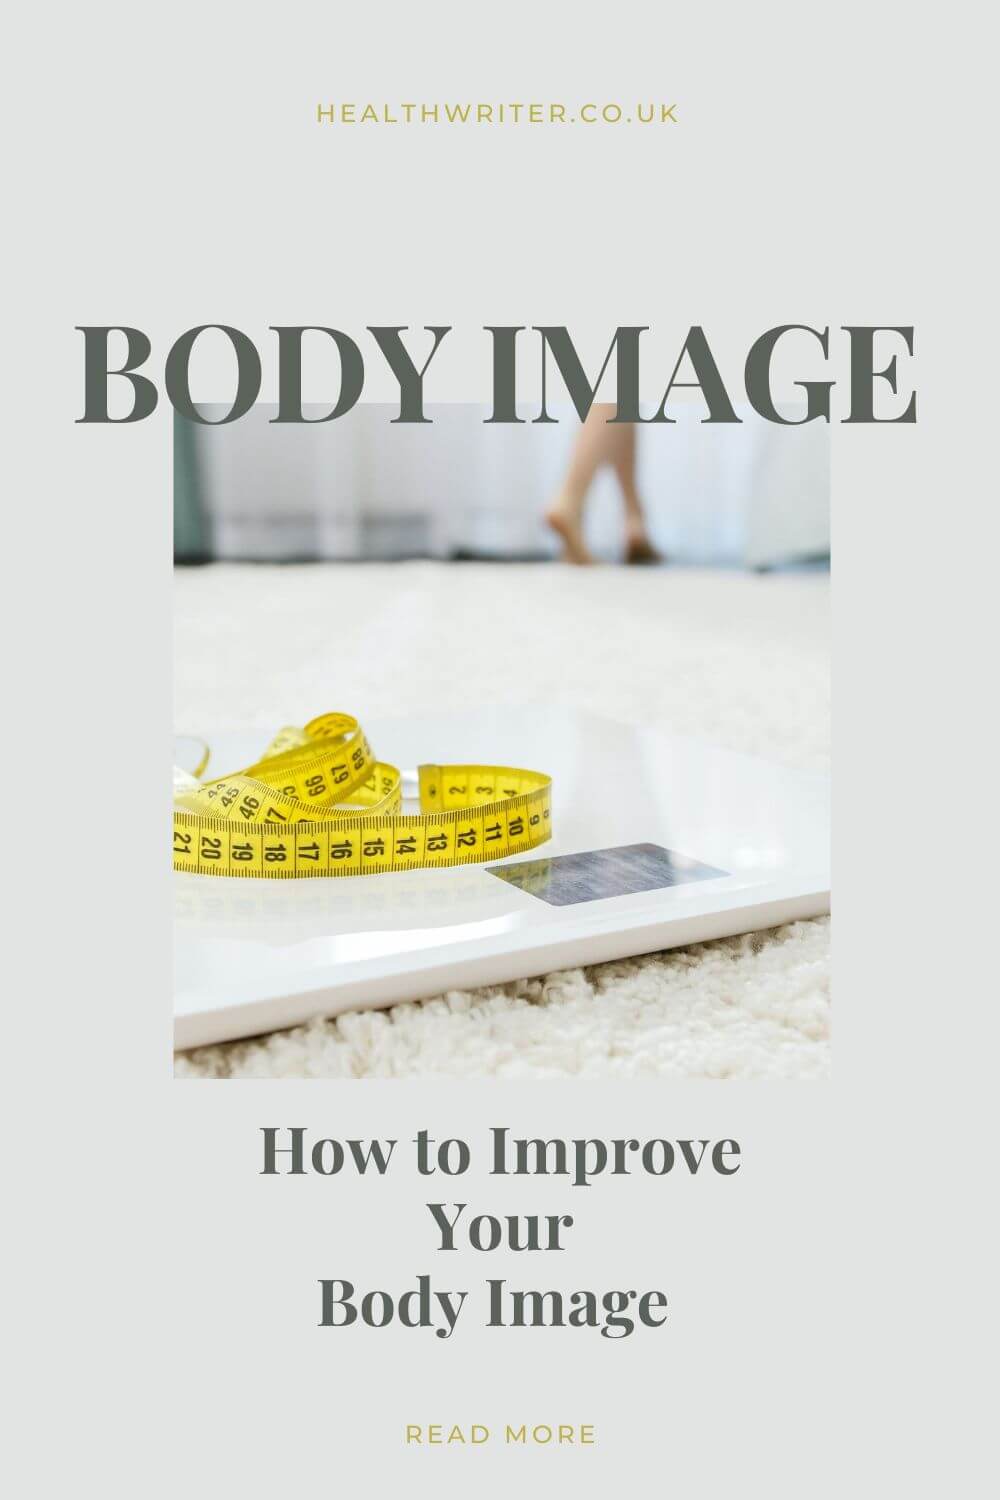 How to Improve Your Body Image